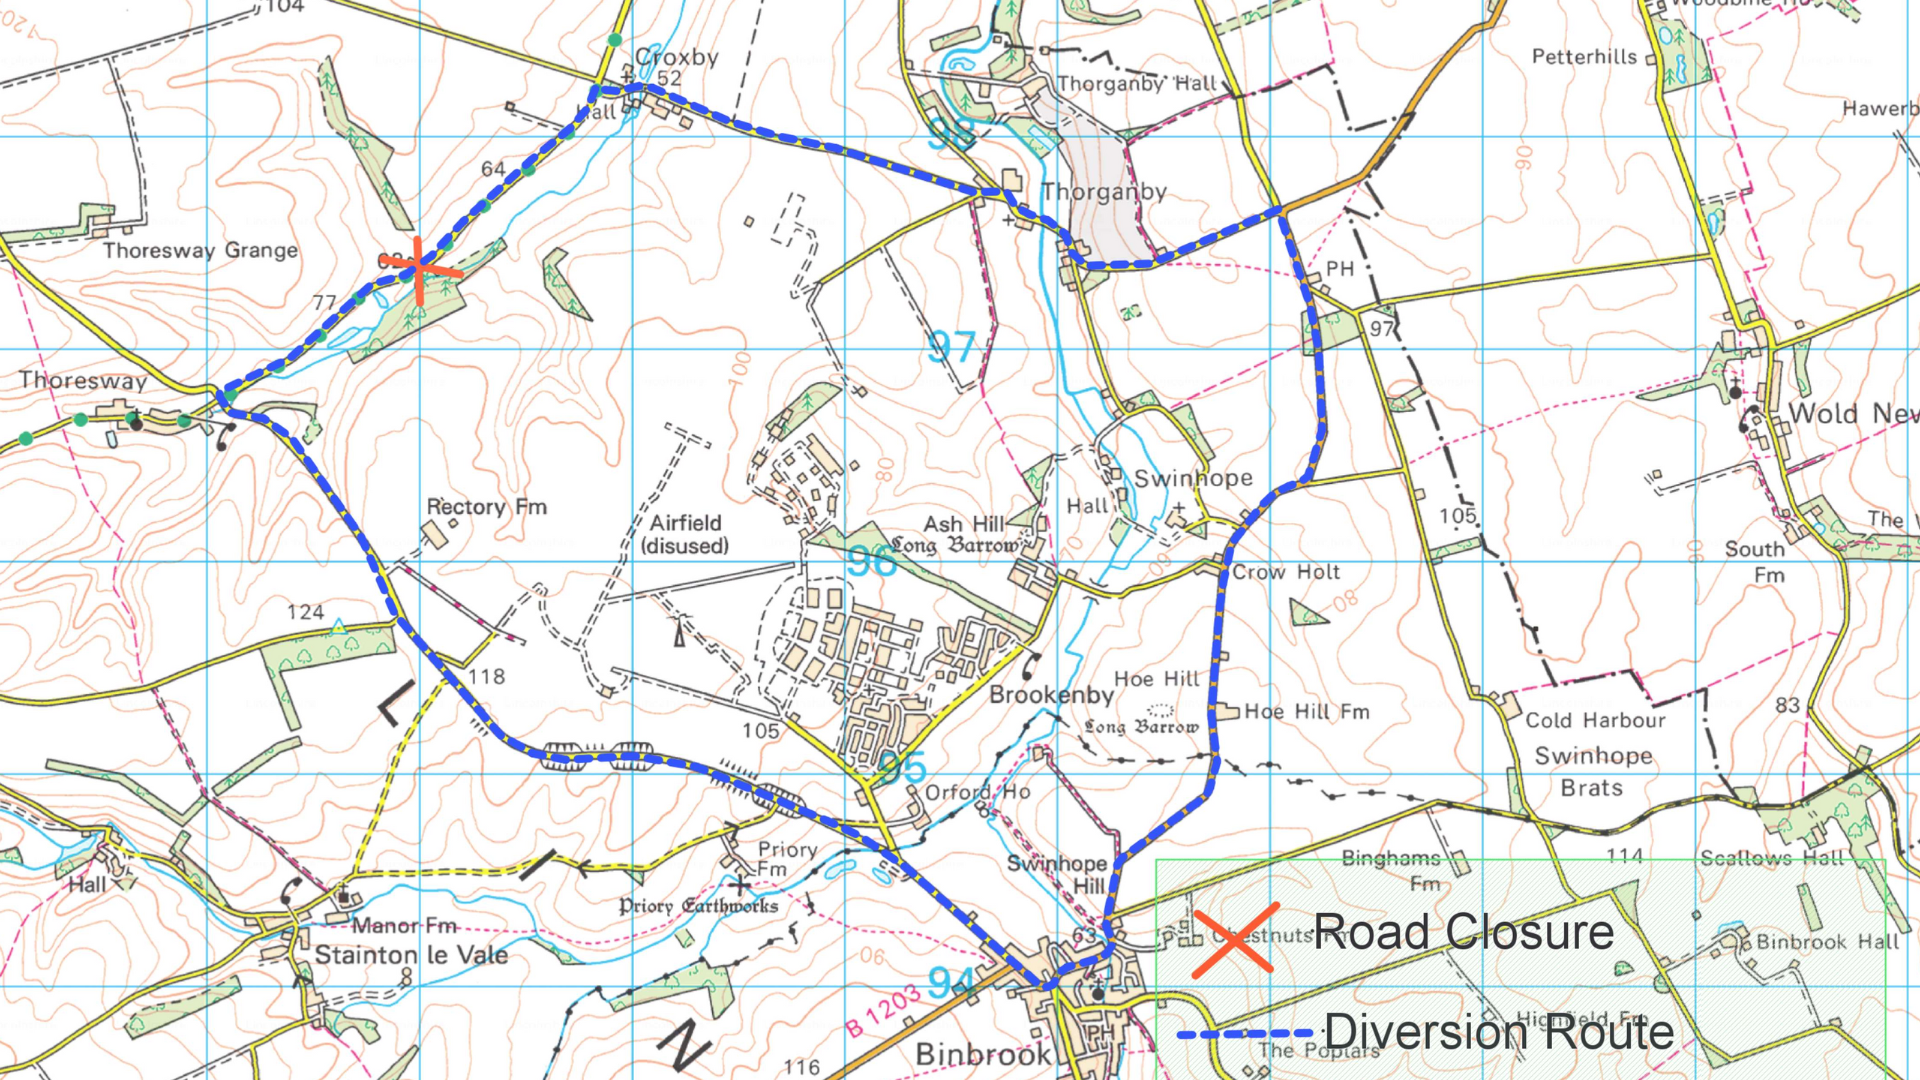 A map of the diversion route for the works